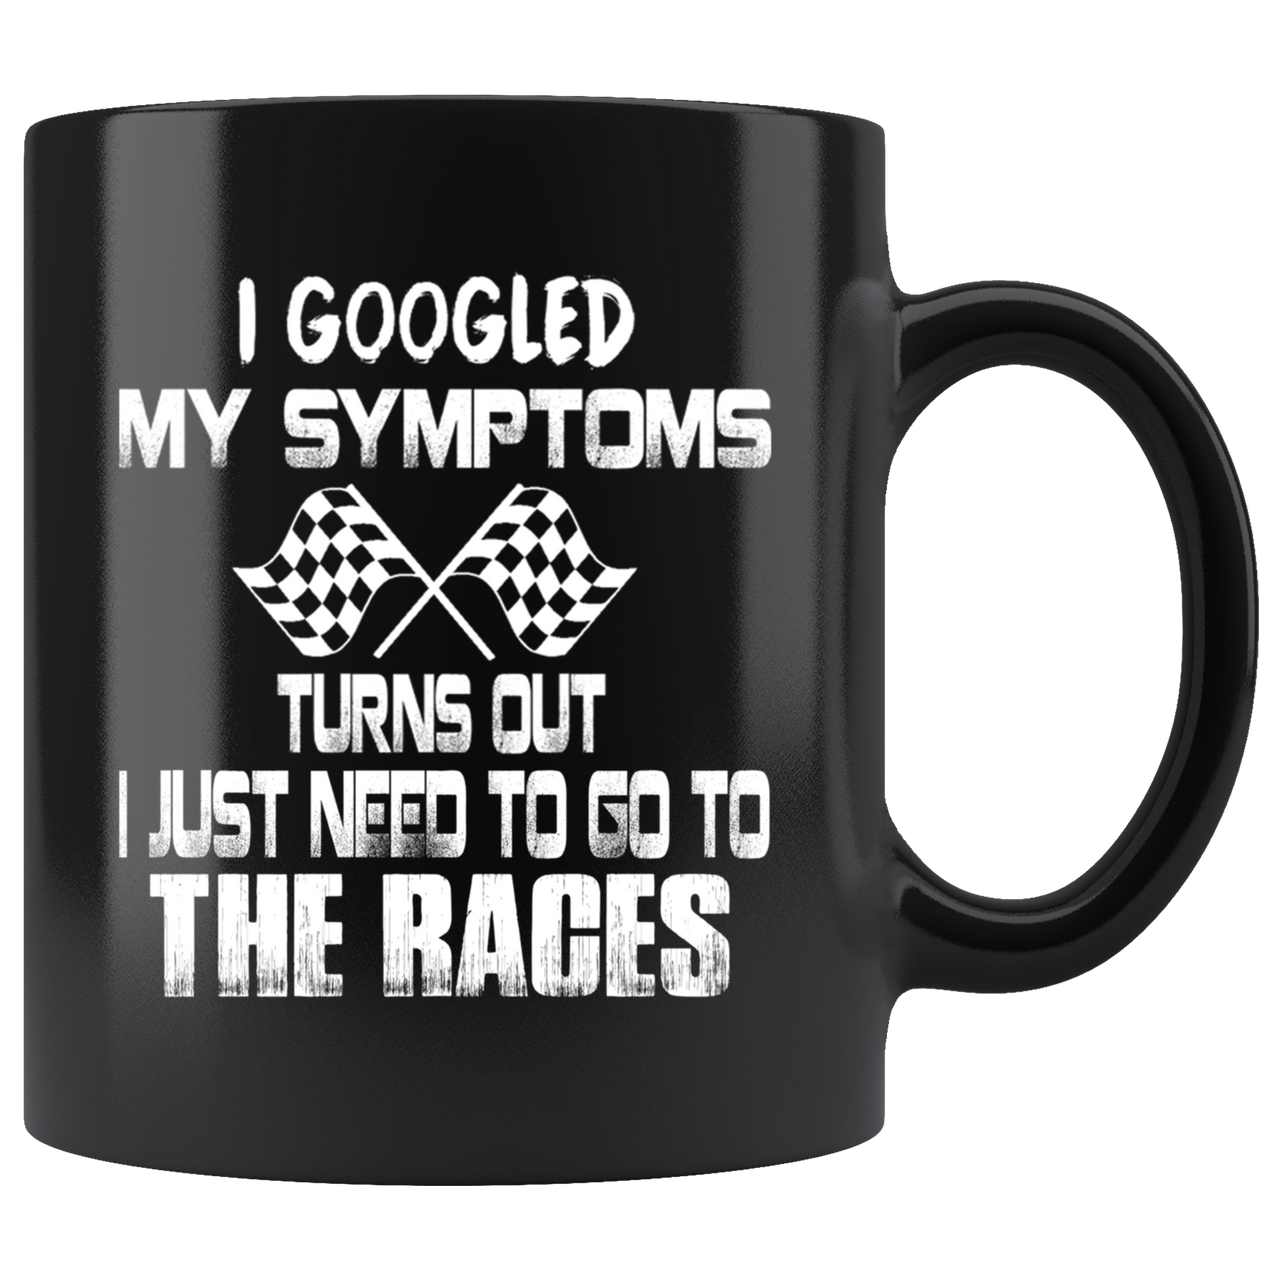 I Googled My Symptoms Turns Out I Just Need To Go To The Races Mug!